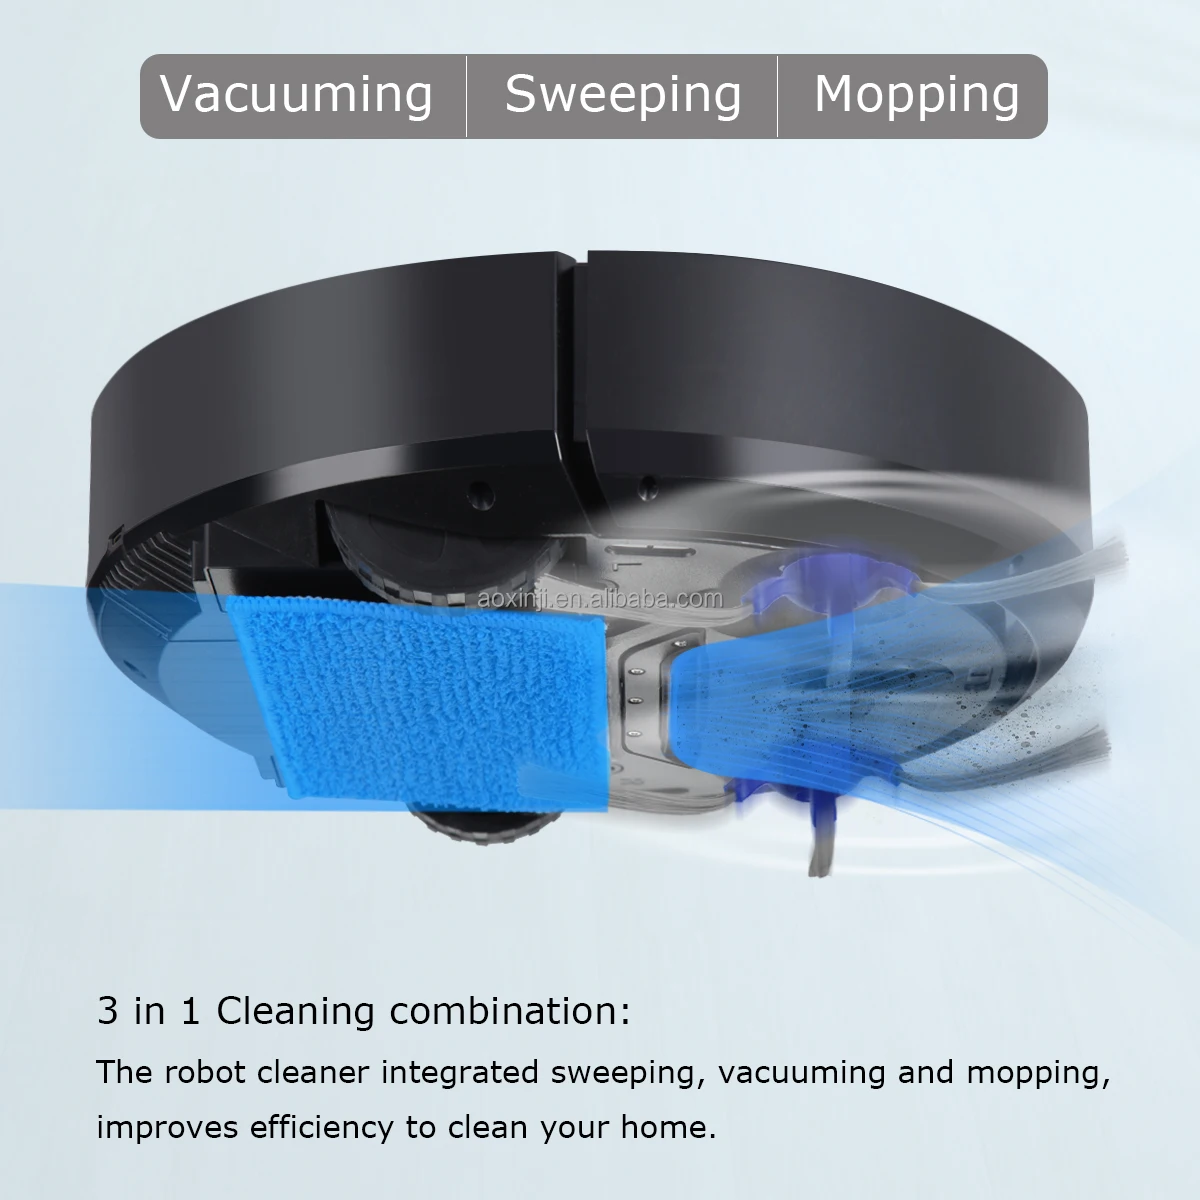 China Manufacturer Cleaning Appliances Home Vacuum Cleaner Cheap Self Charging Robotic Vacuum Cleaner with Docking Station